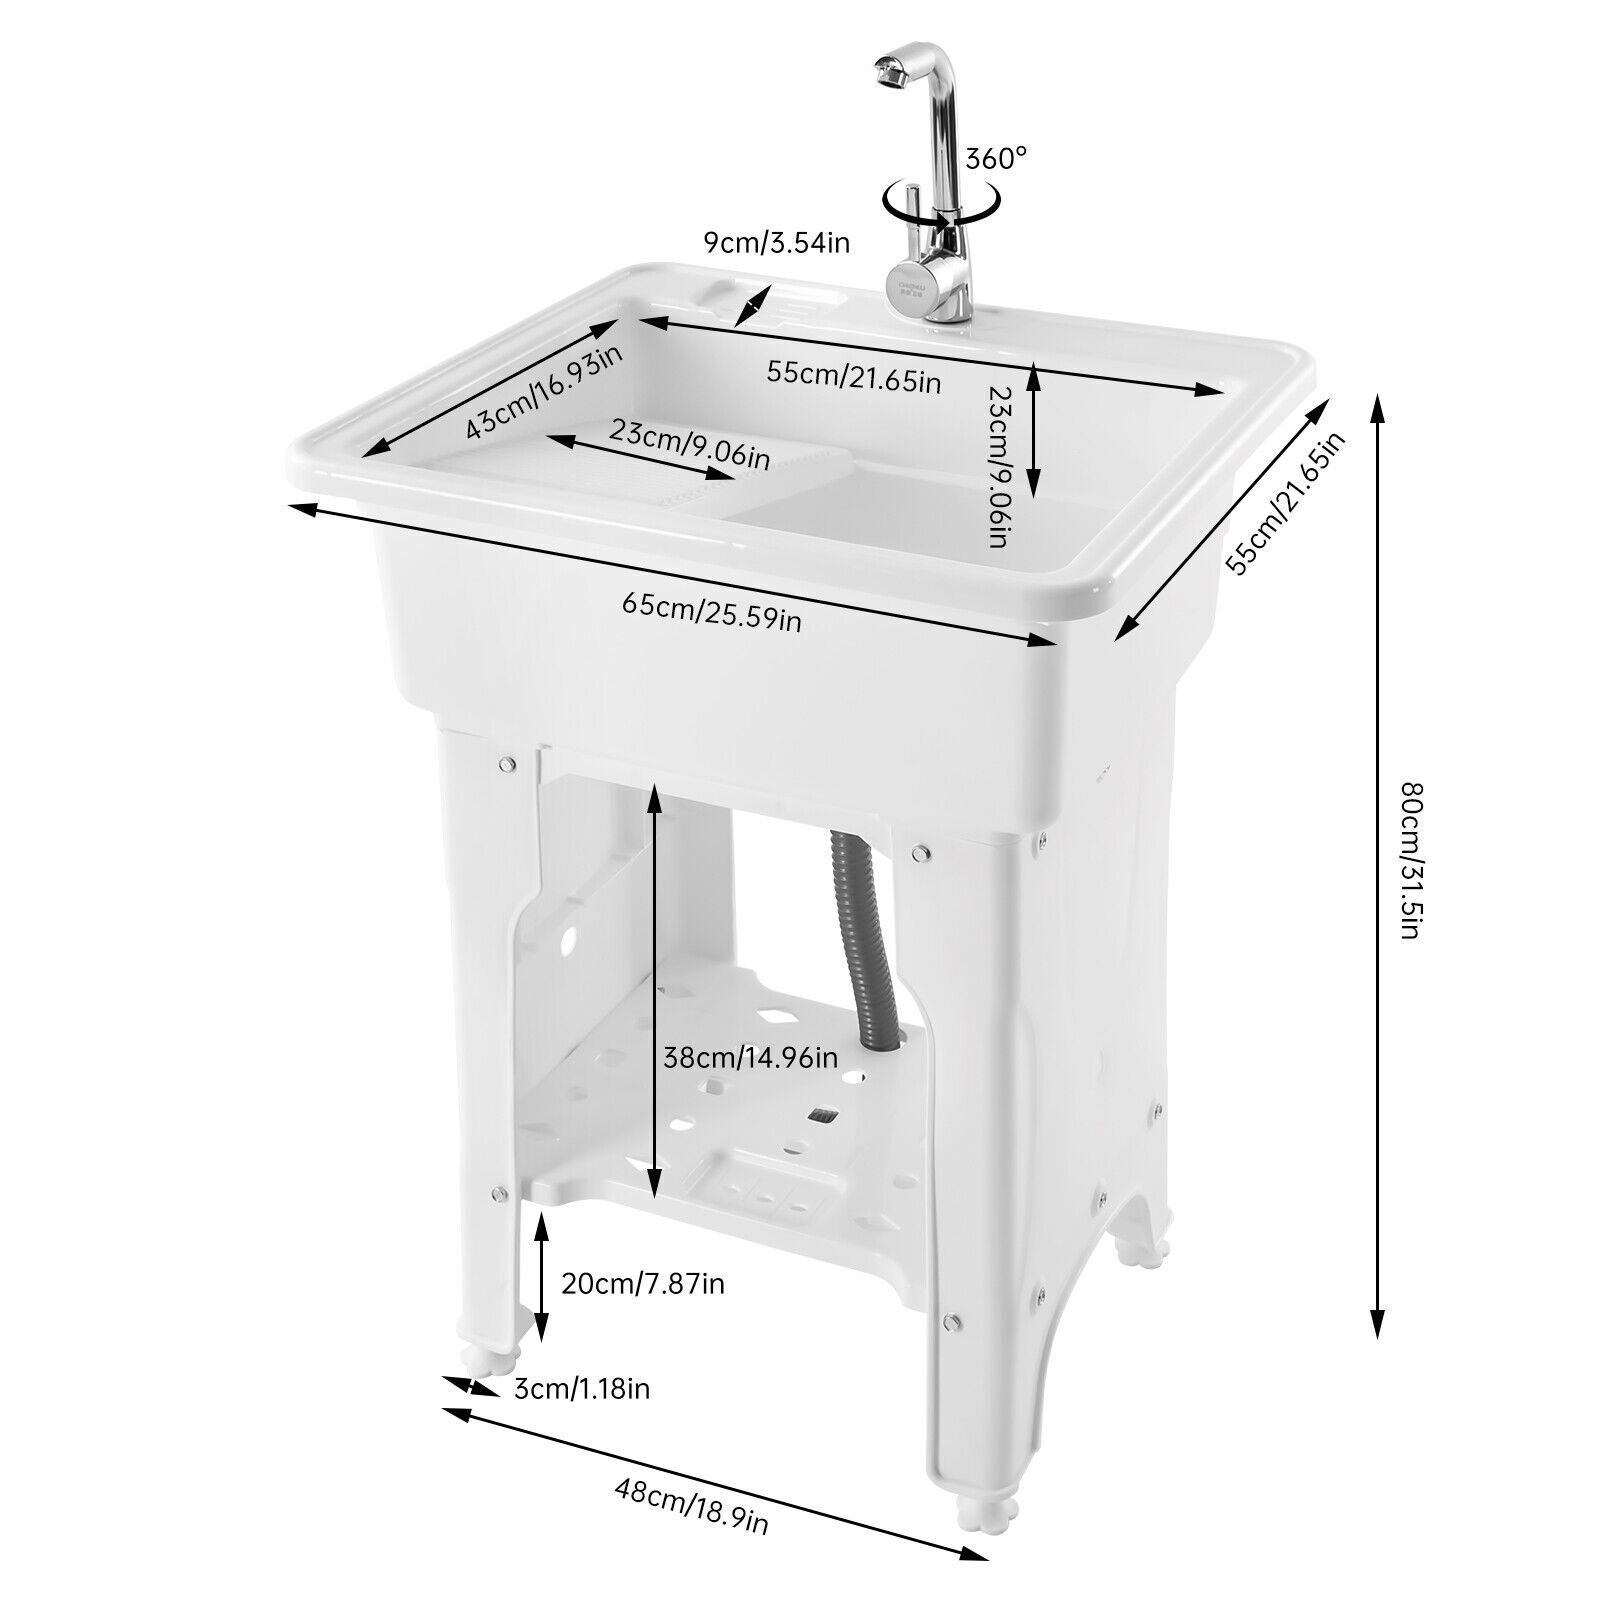 Laundry Utility Sink Freestanding Outdoor Washing Tub Wash Station Sink & Faucet